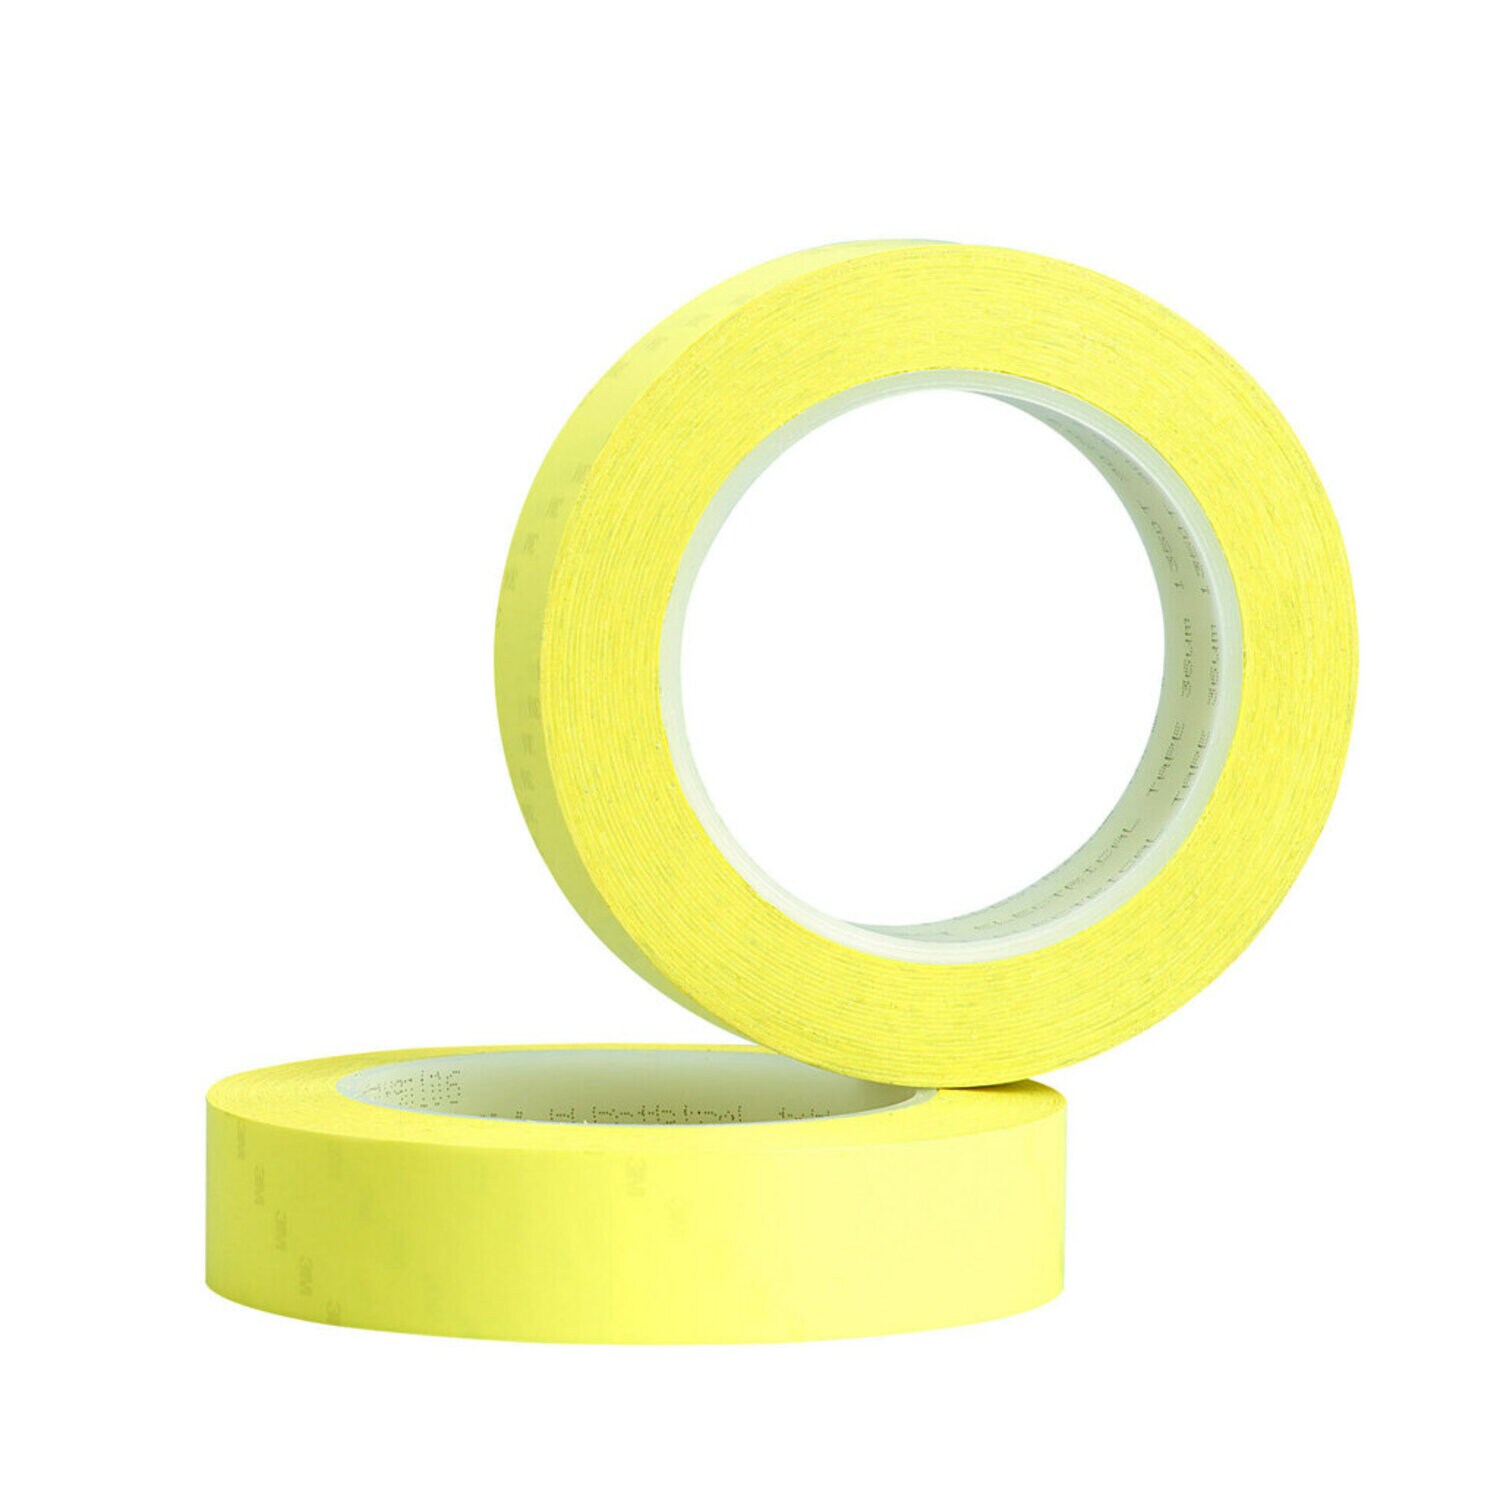 7010045330 - 3M Polyester Film Electrical Tape 74, 3/8 in x 72 yd, Yellow, 96
Rolls/Case